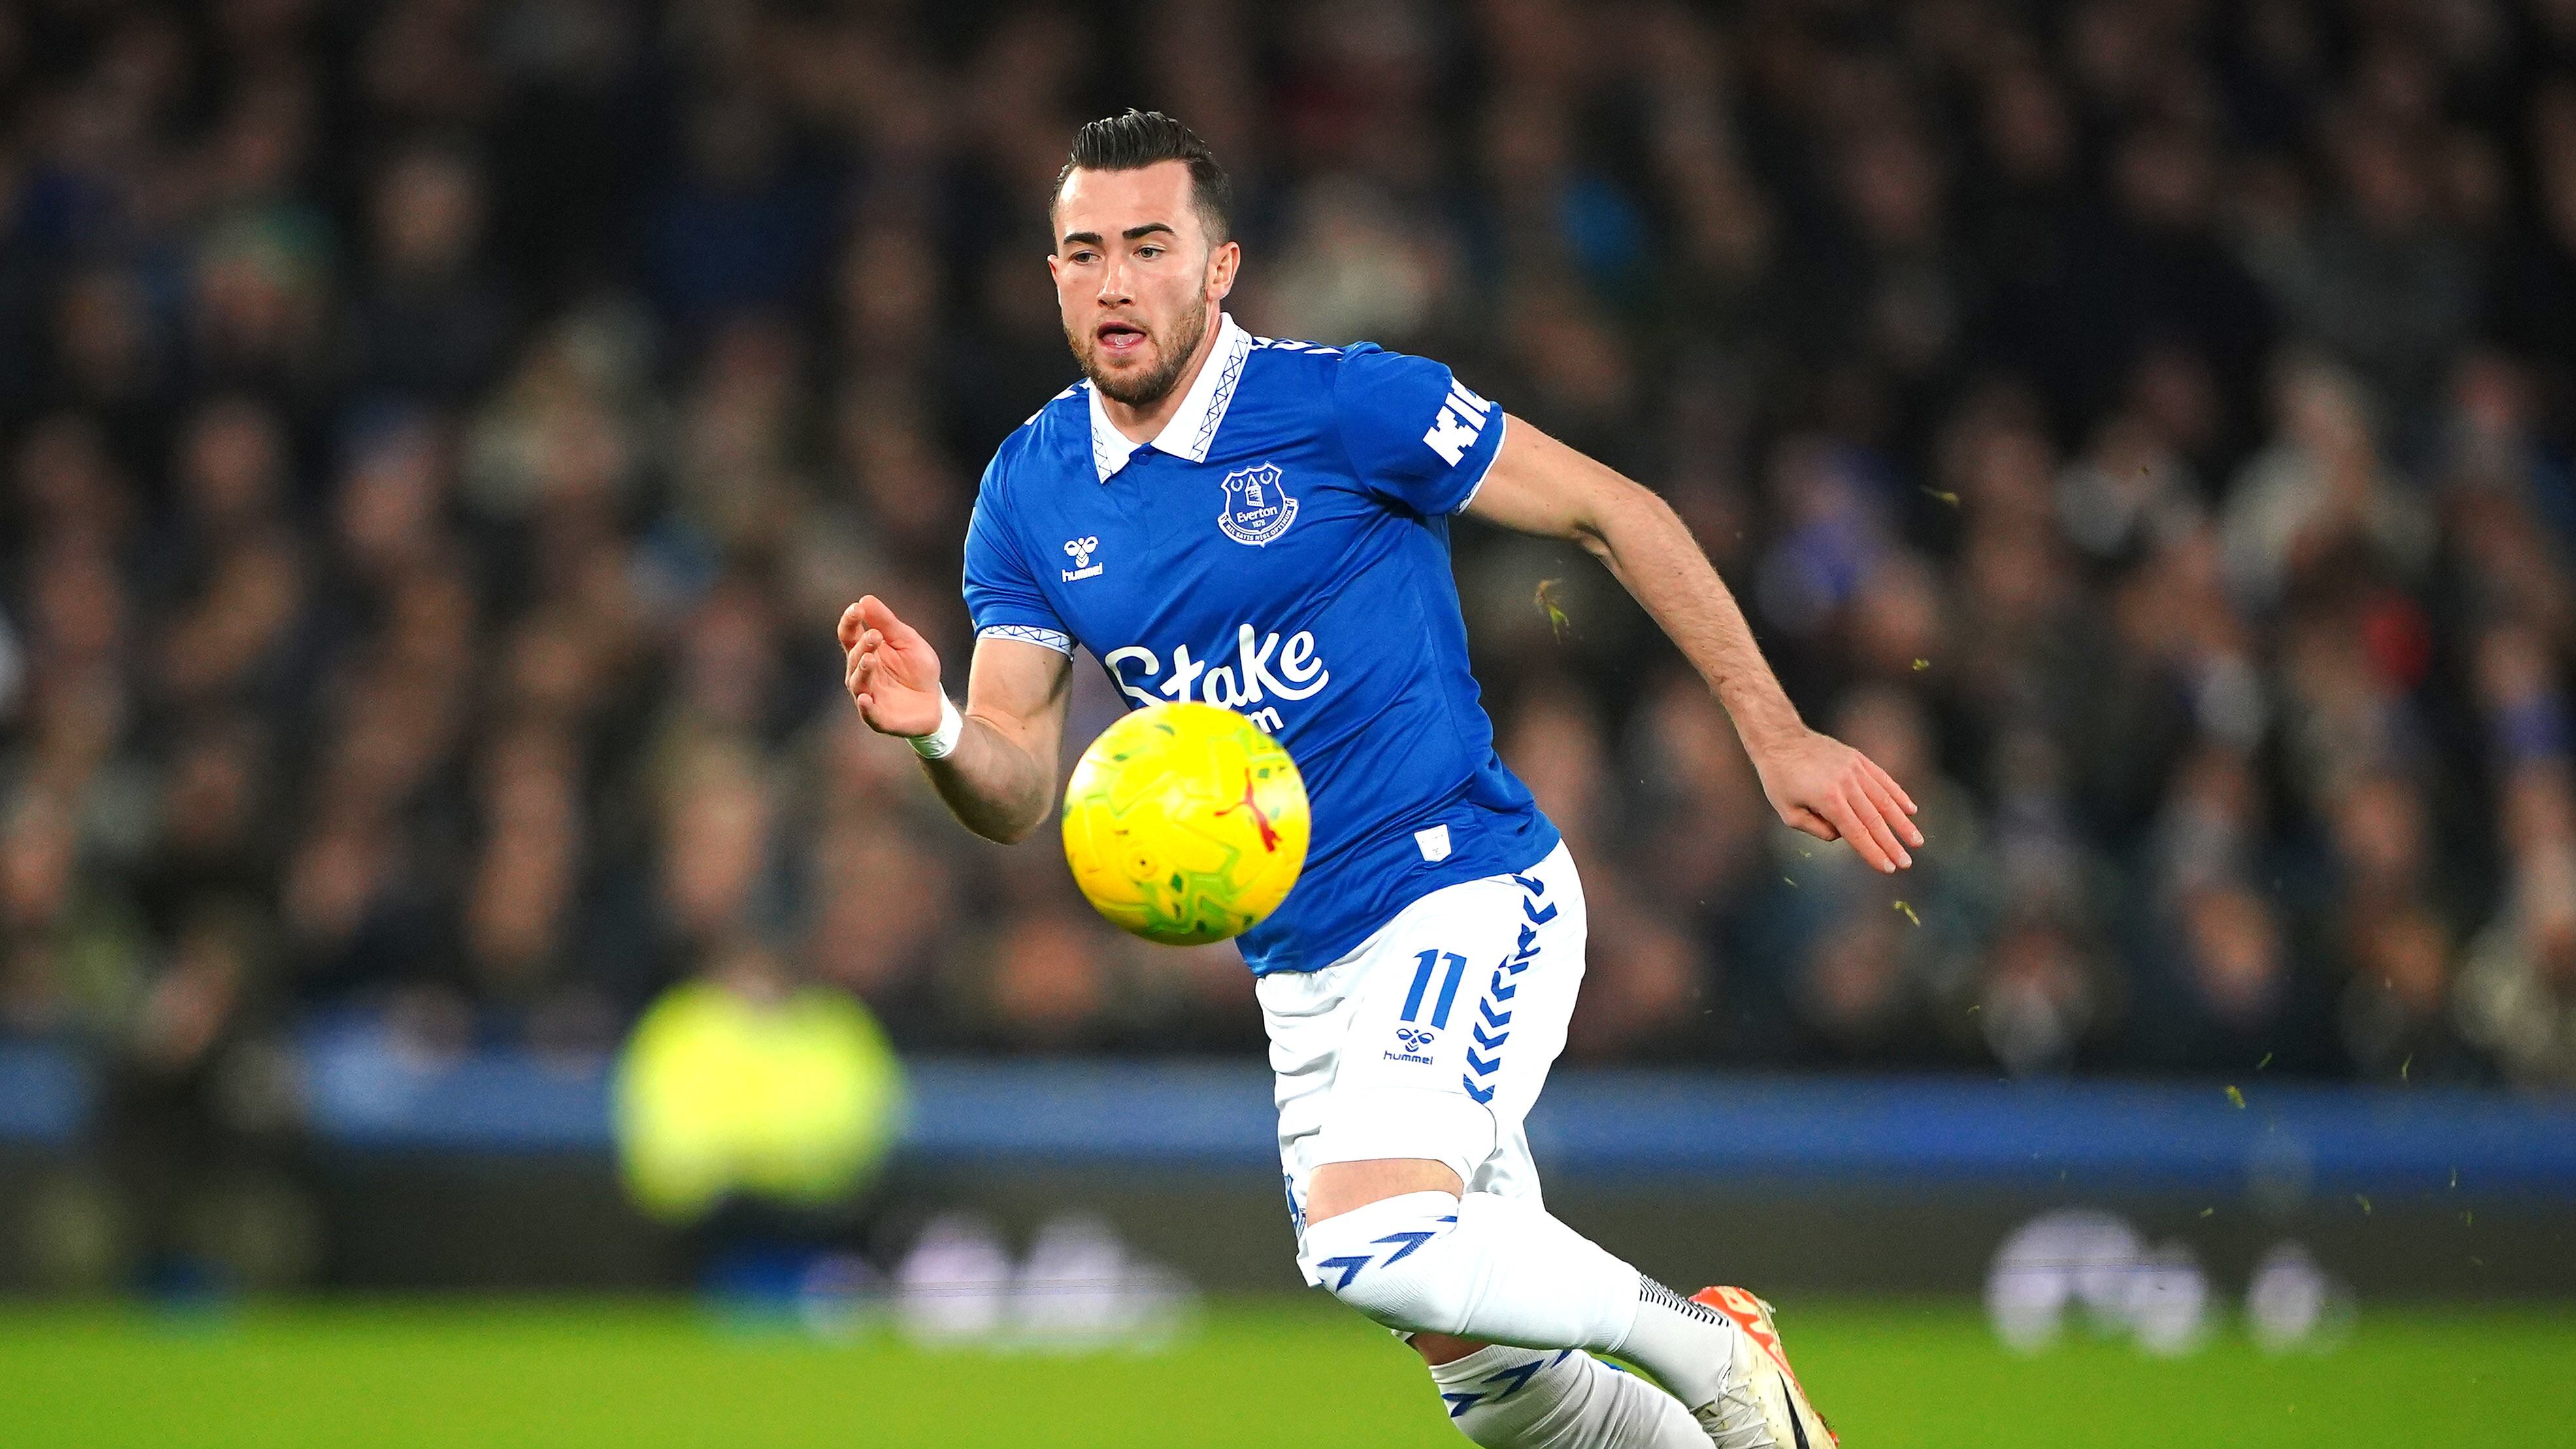 Jack Harrison will spend a further season on loan at Everton from Leeds